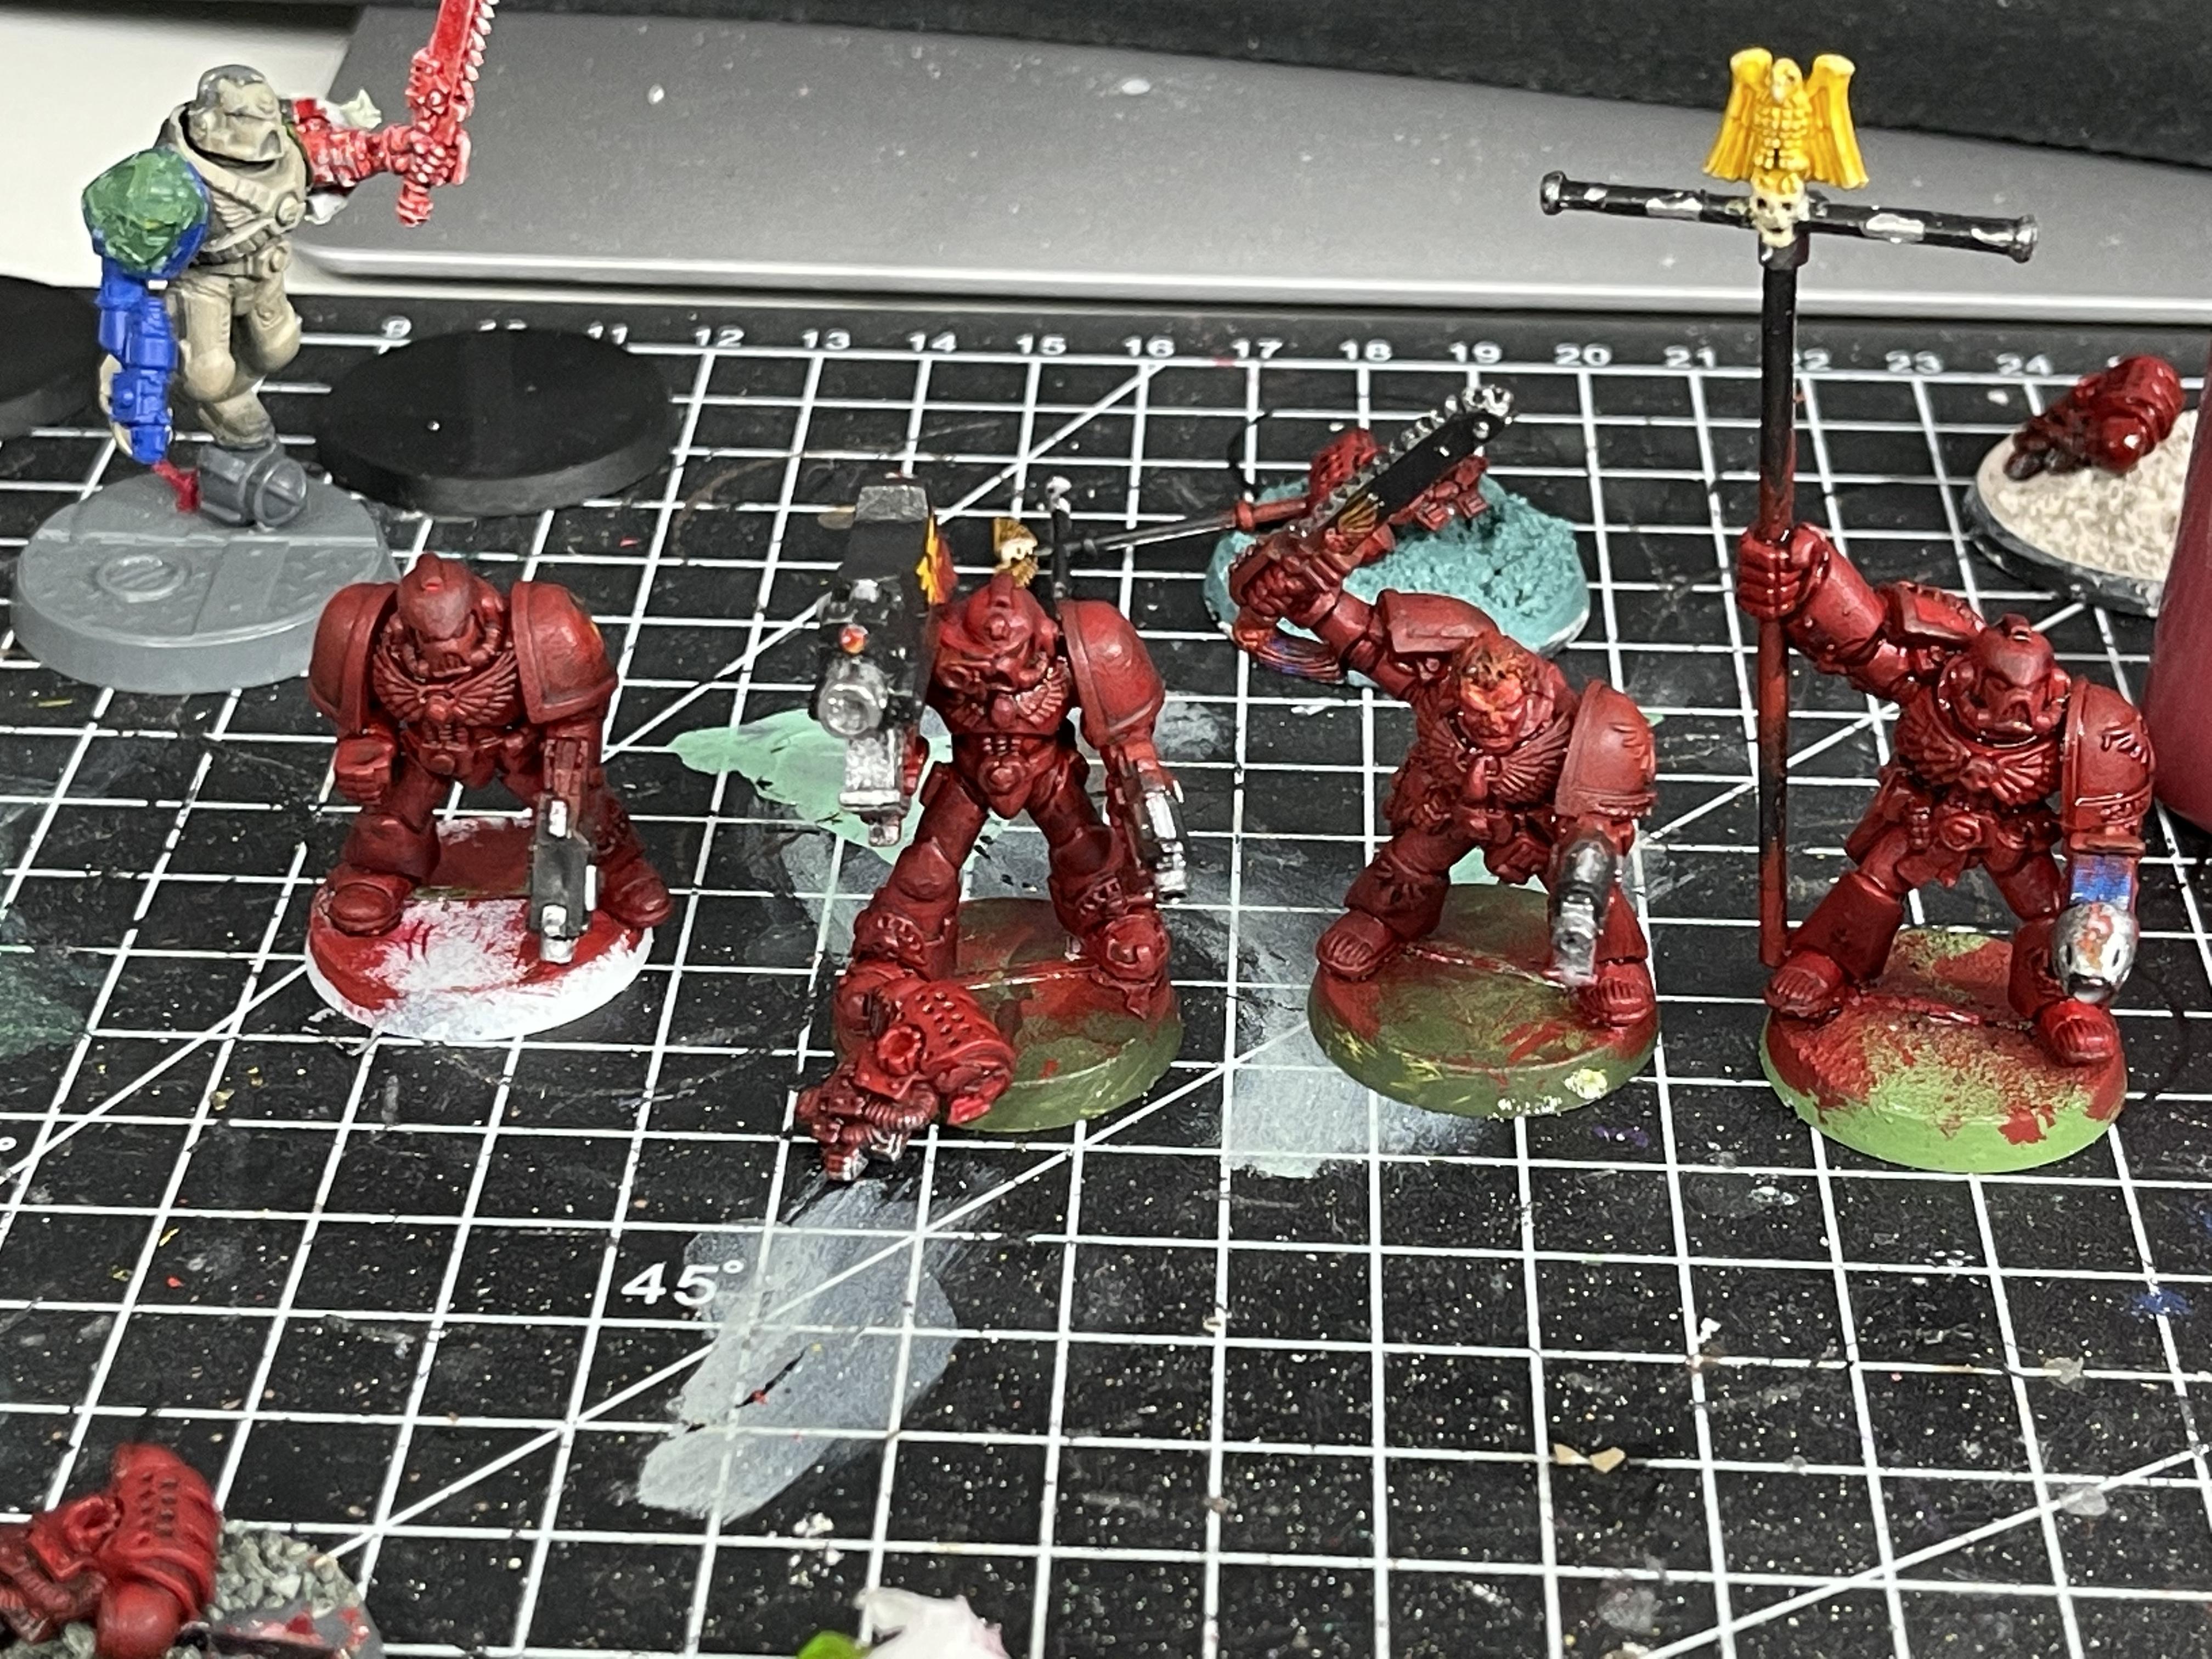 2nd Edition, Blood Angels, Space Marines, Tactical Squad, Warhammer 40,000,  Work In Progress - Mephiston Red and Agrax Earthshade - Gallery -  DakkaDakka